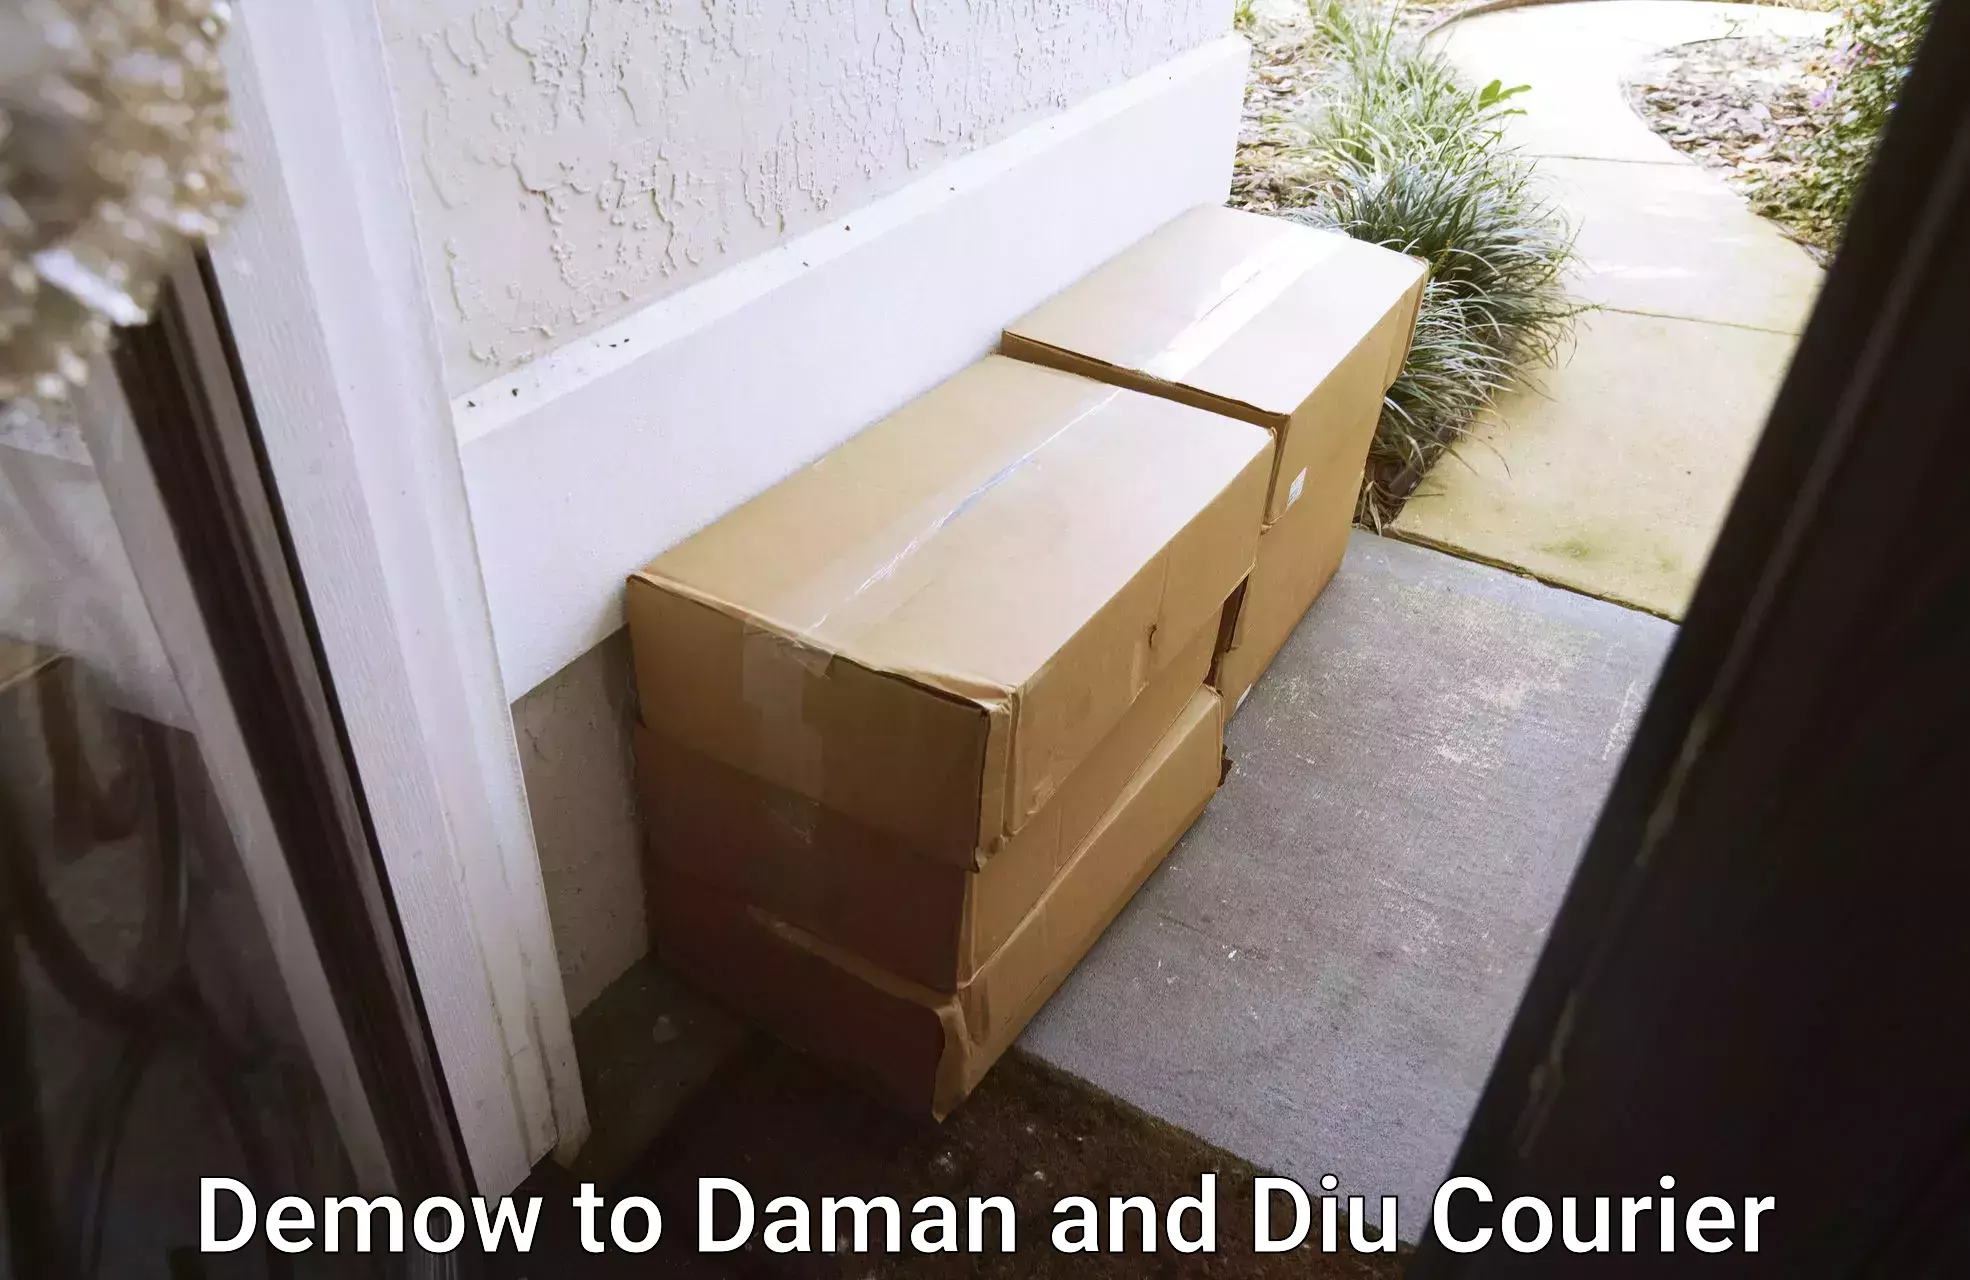 Flexible parcel services Demow to Daman and Diu